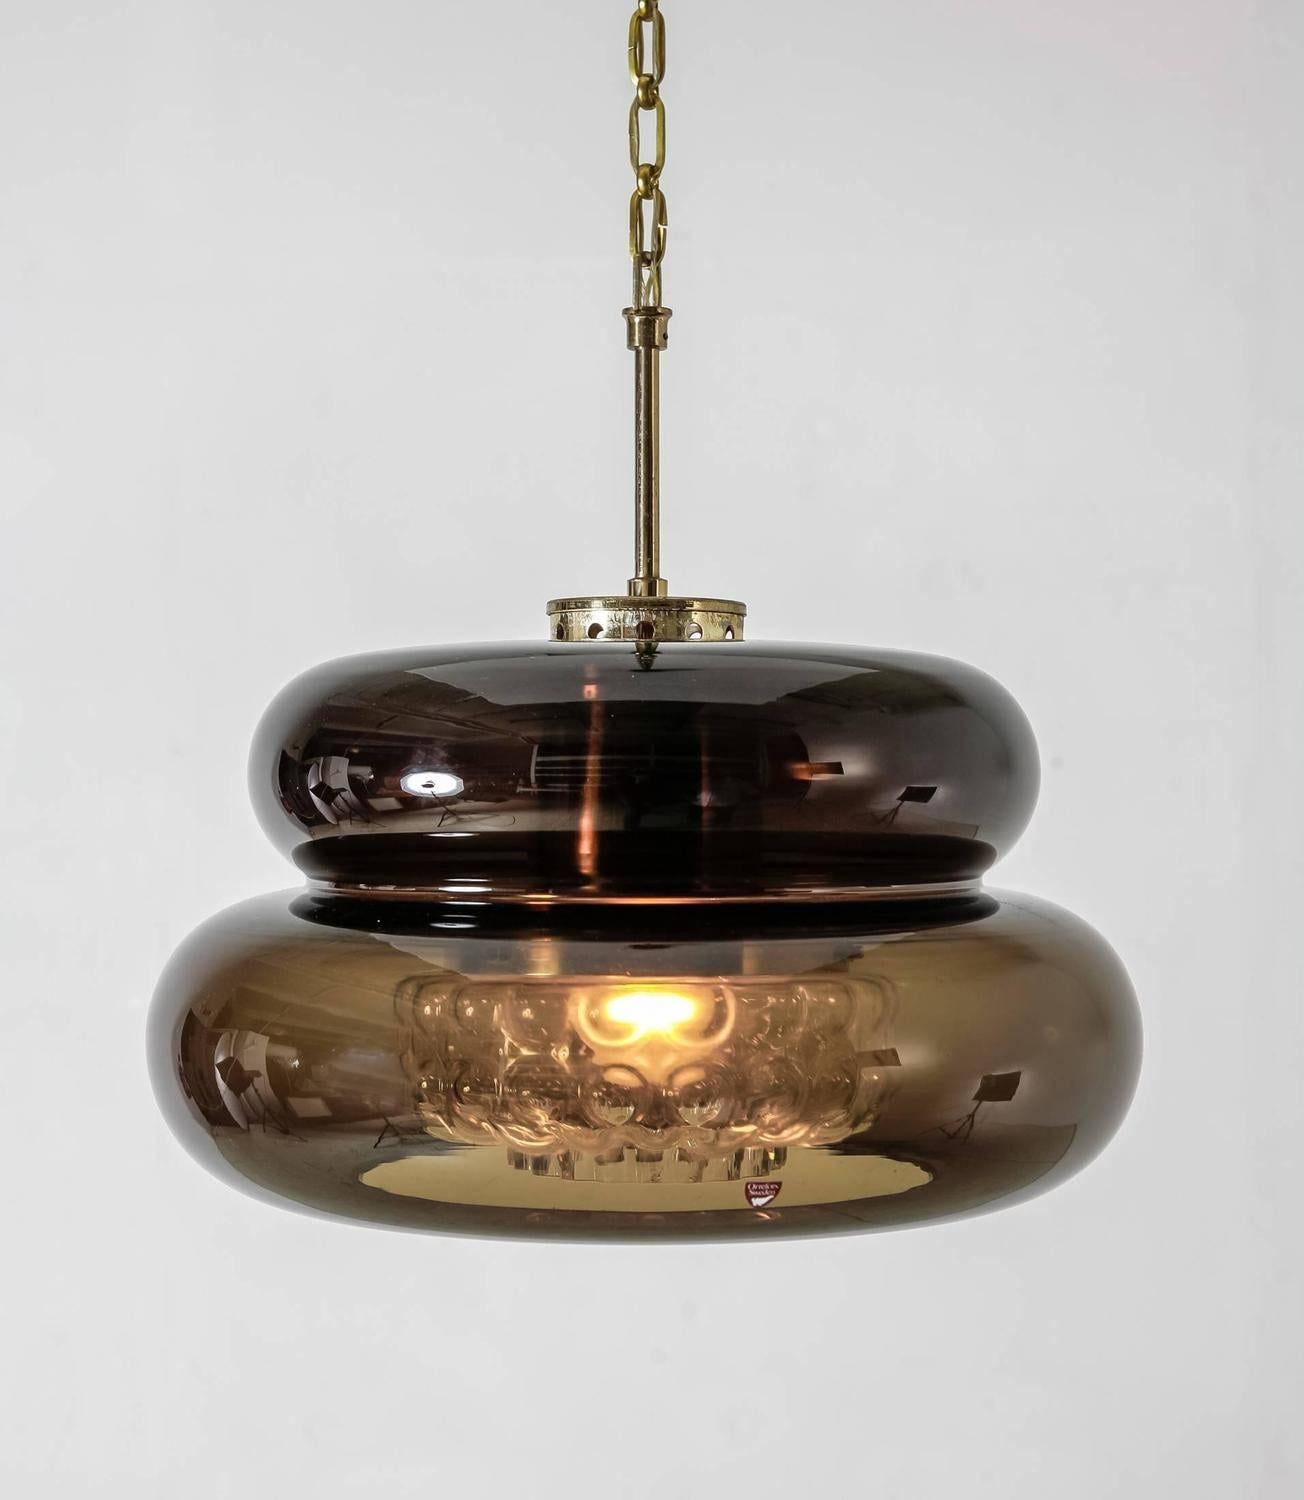 A Carl Fagerlund glass 'Bubblan' pendant for Orrefors. The lamp is made of a smoky brown curved glass with a textured clear glass diffuser inside.

The lamp is in a good condition and labeled by Fagerlund.